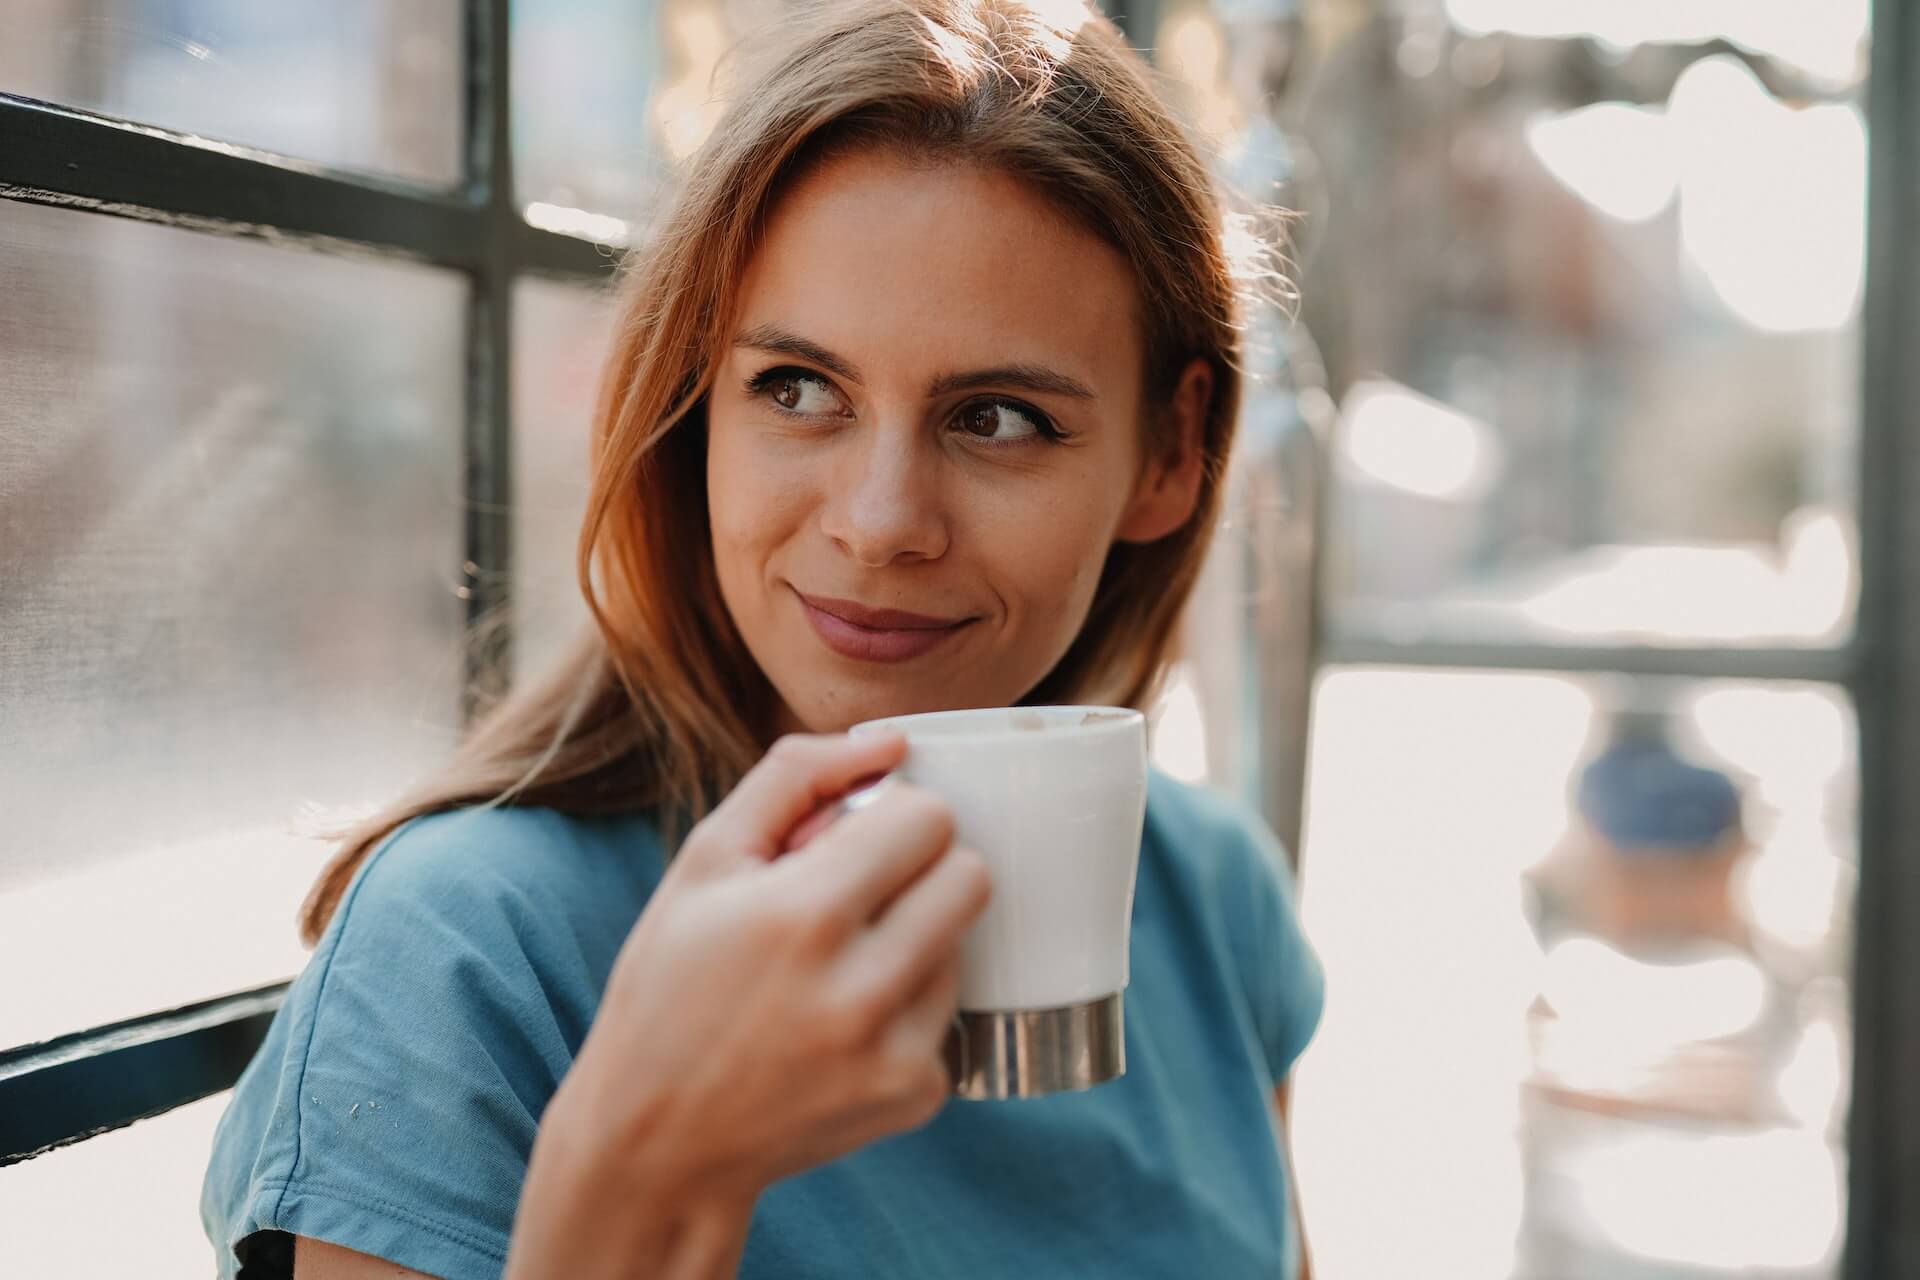 Why Does Coffee Feel So Good?